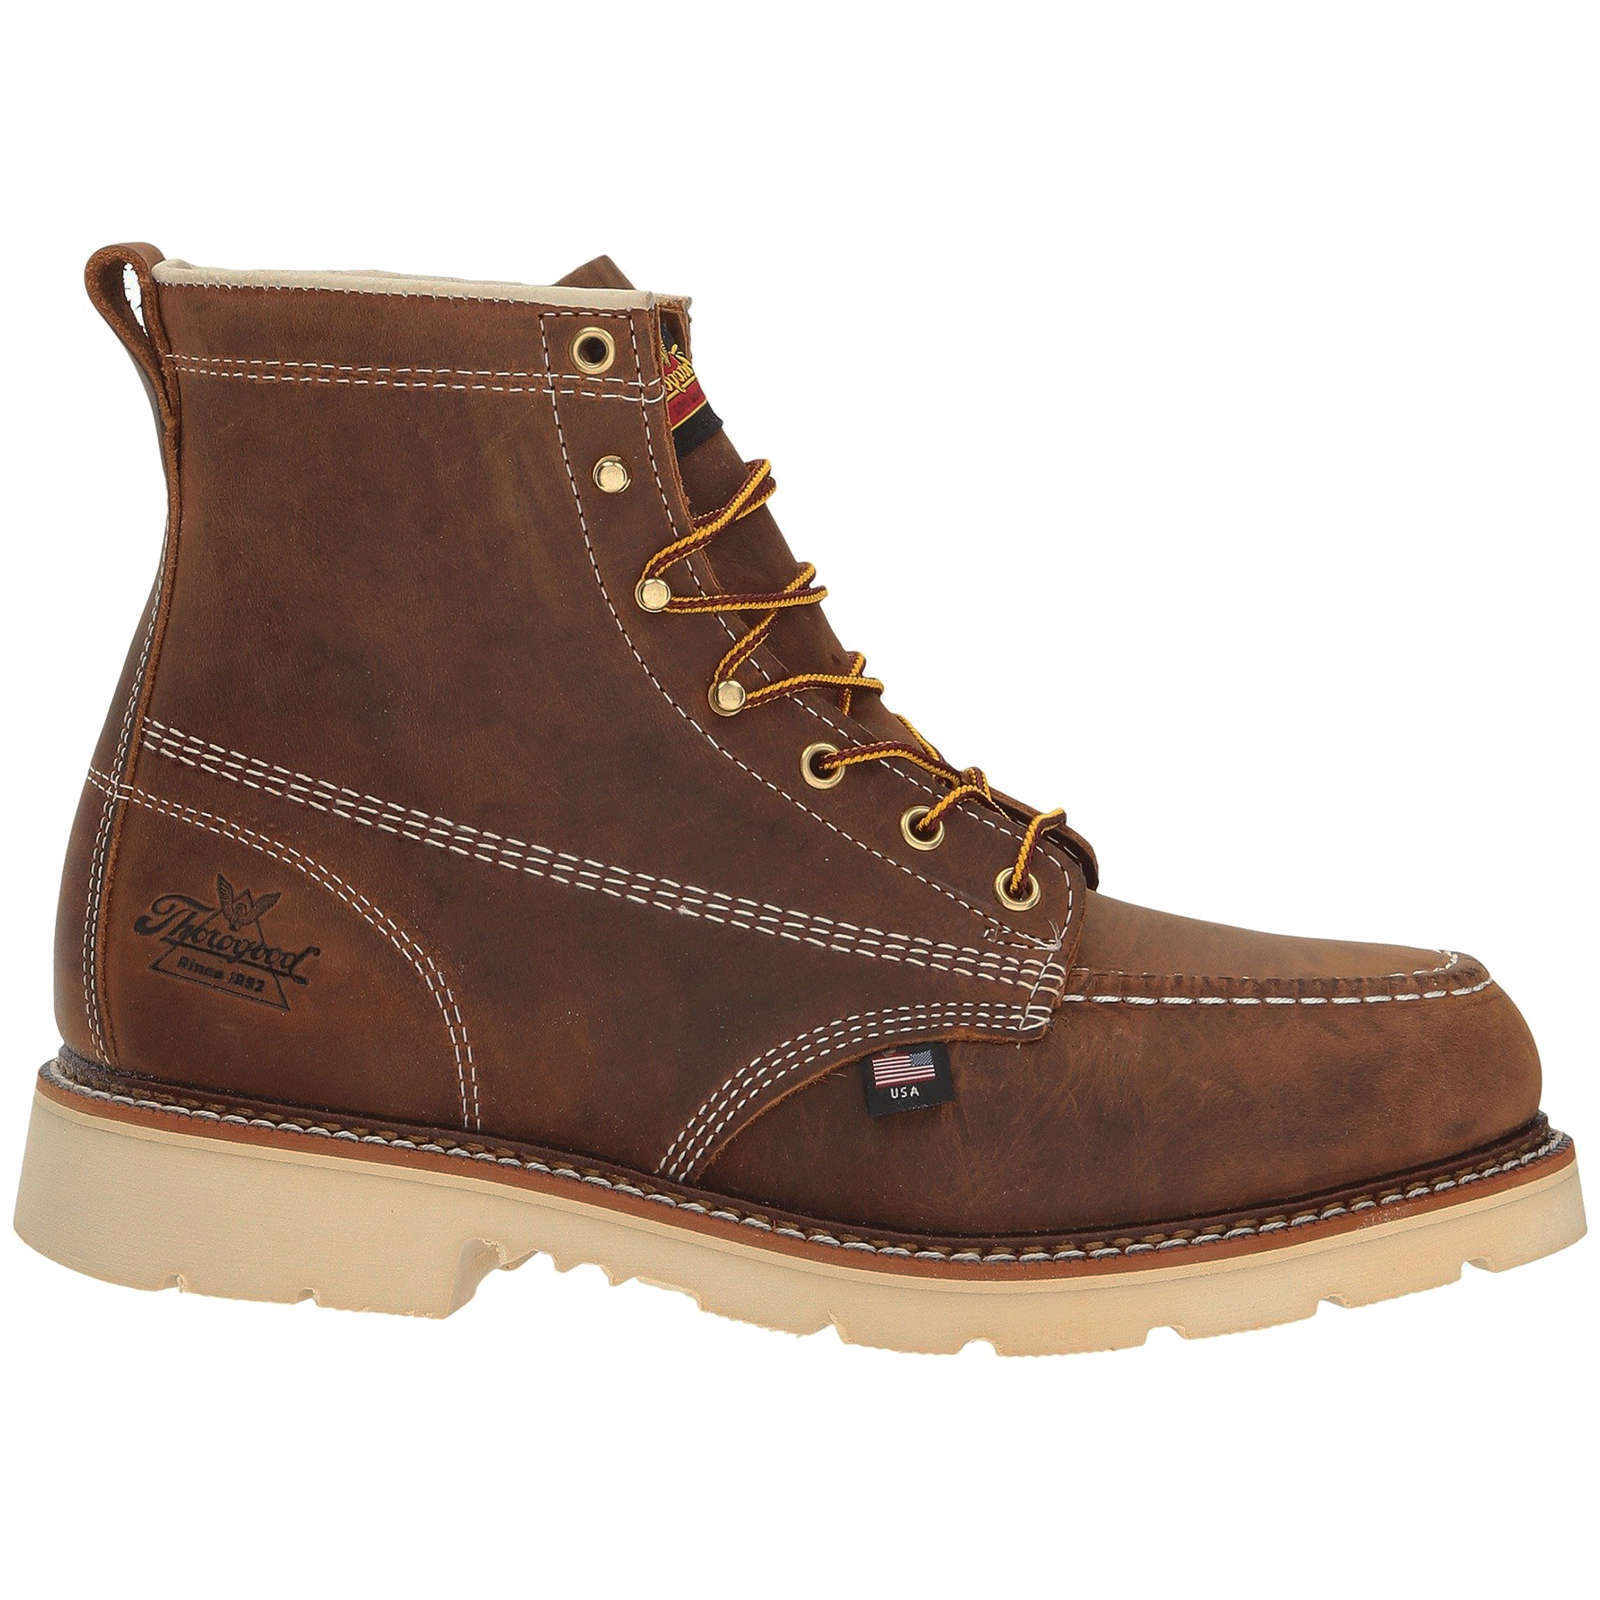 Thorogood American Heritage 6 Inch Men's Moc Toe Boots#color_crazy horse